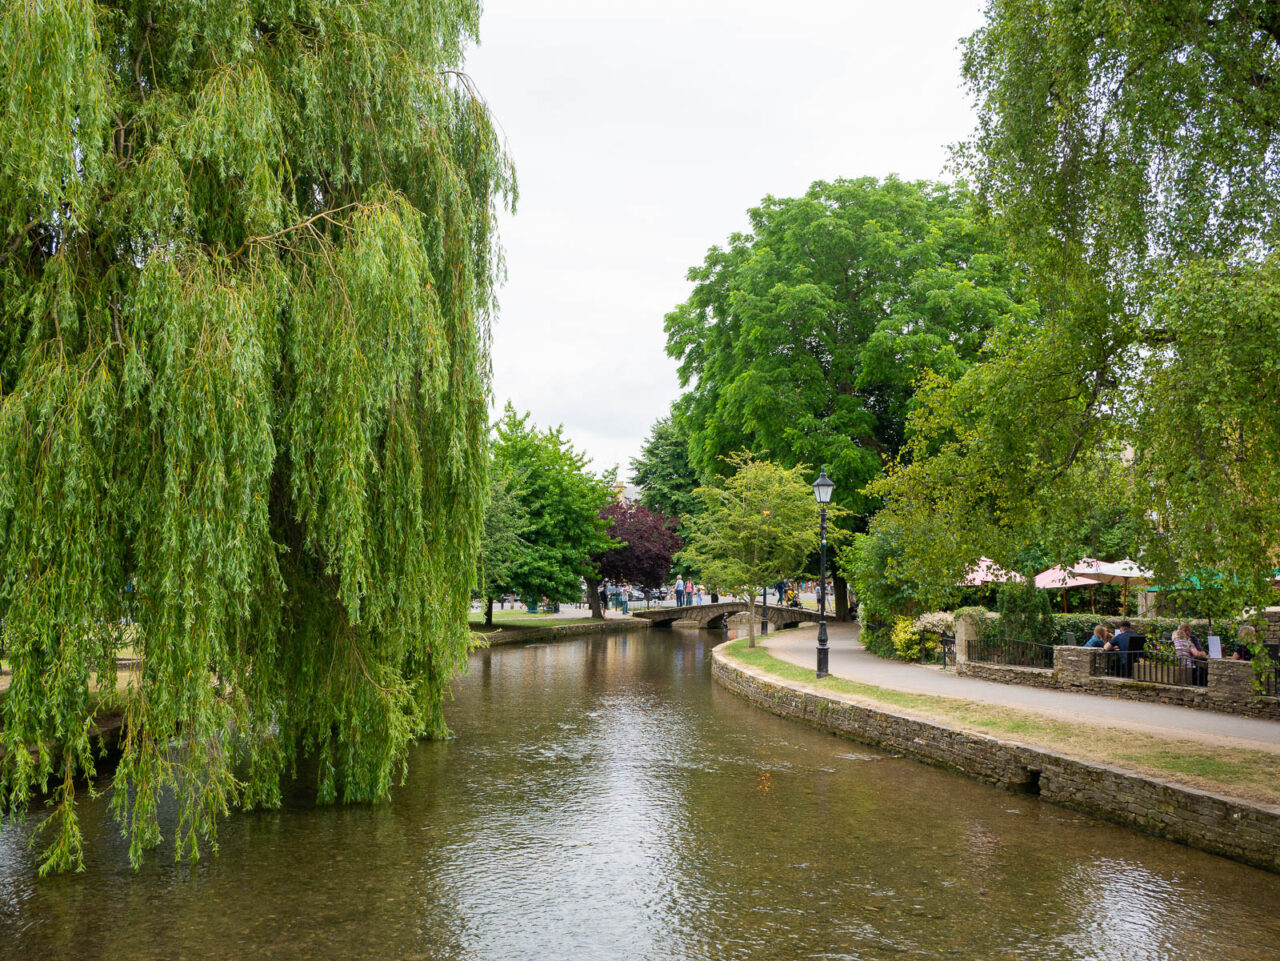 River in Bourton on the Water, the Cotswolds England